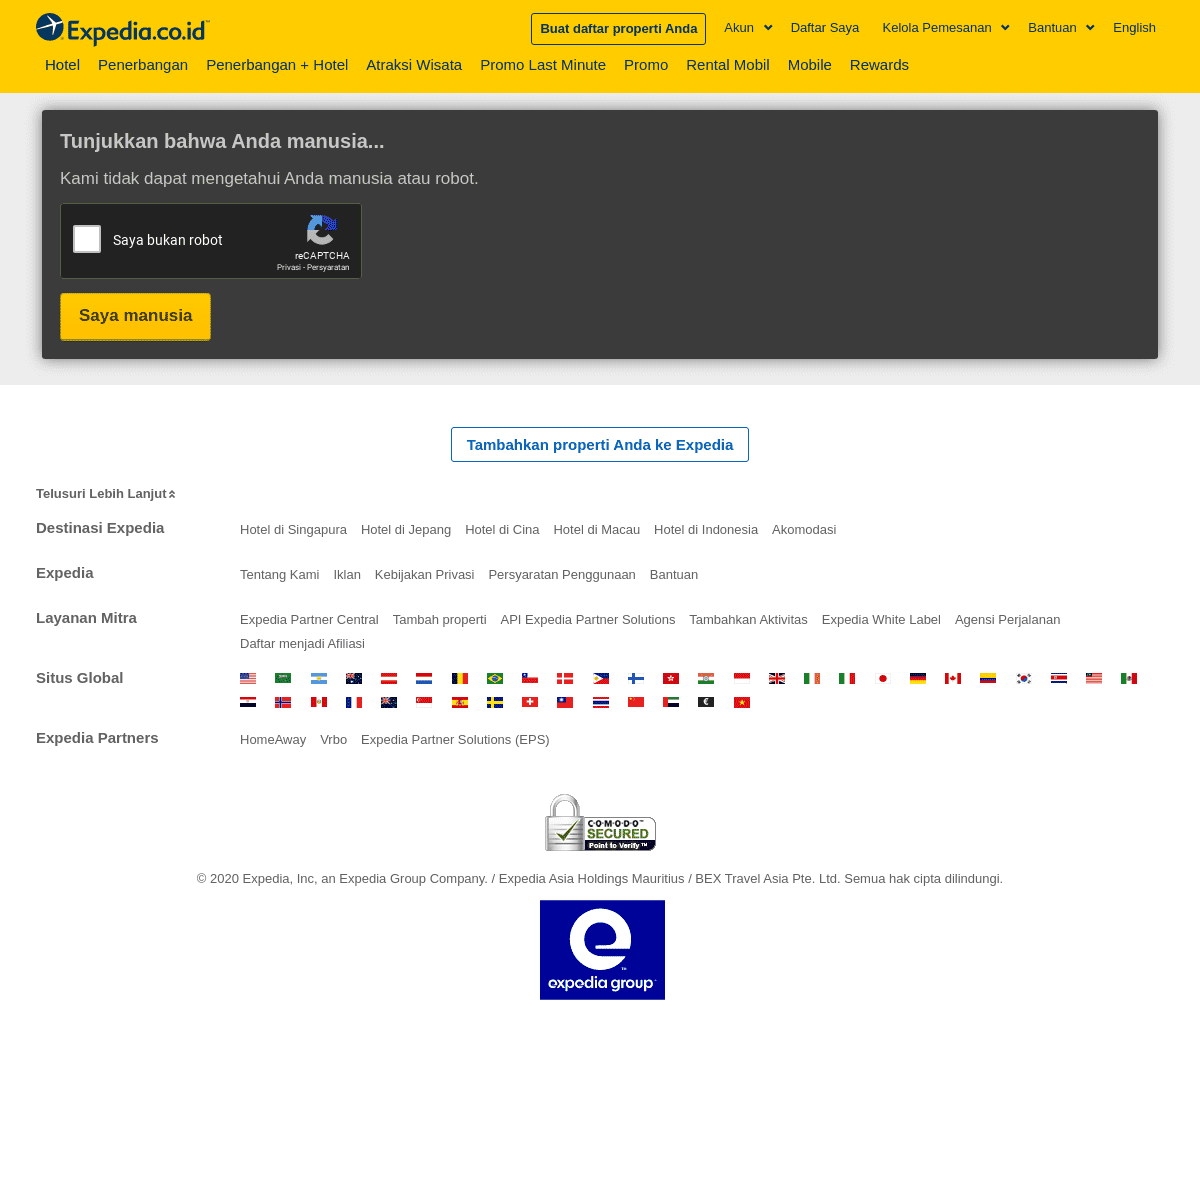 A complete backup of expedia.co.id